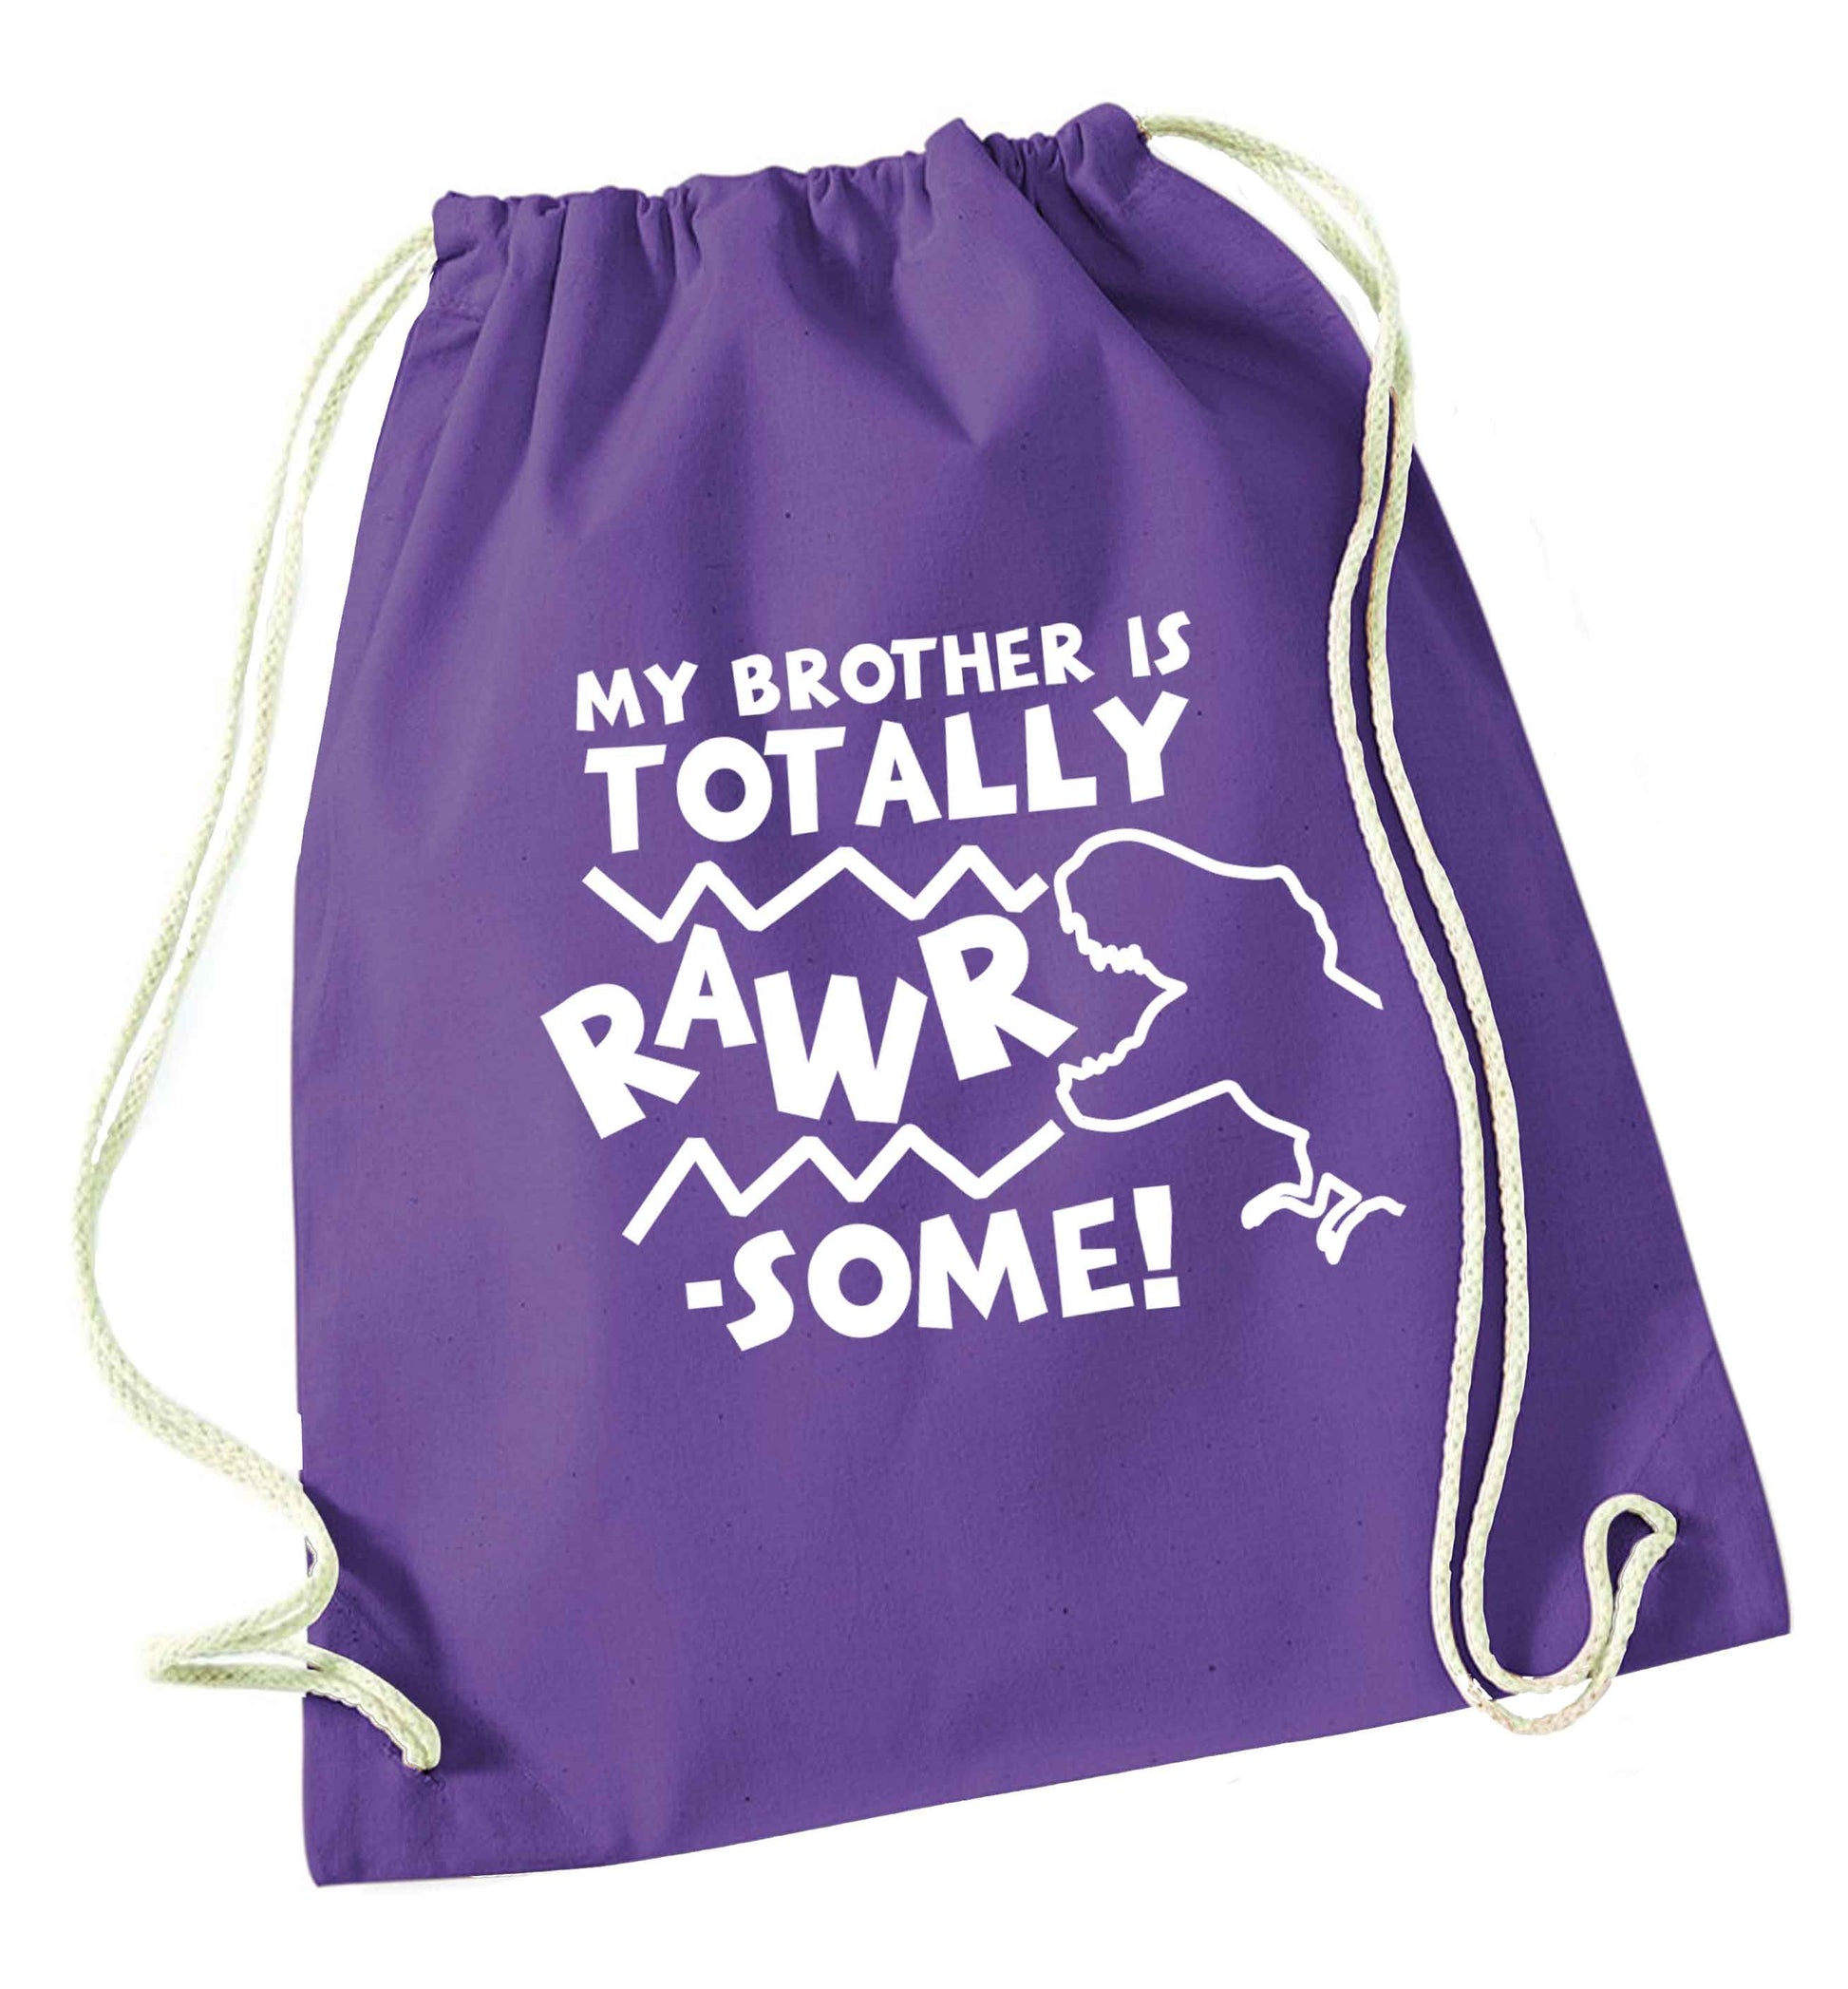 My brother is totally rawrsome purple drawstring bag